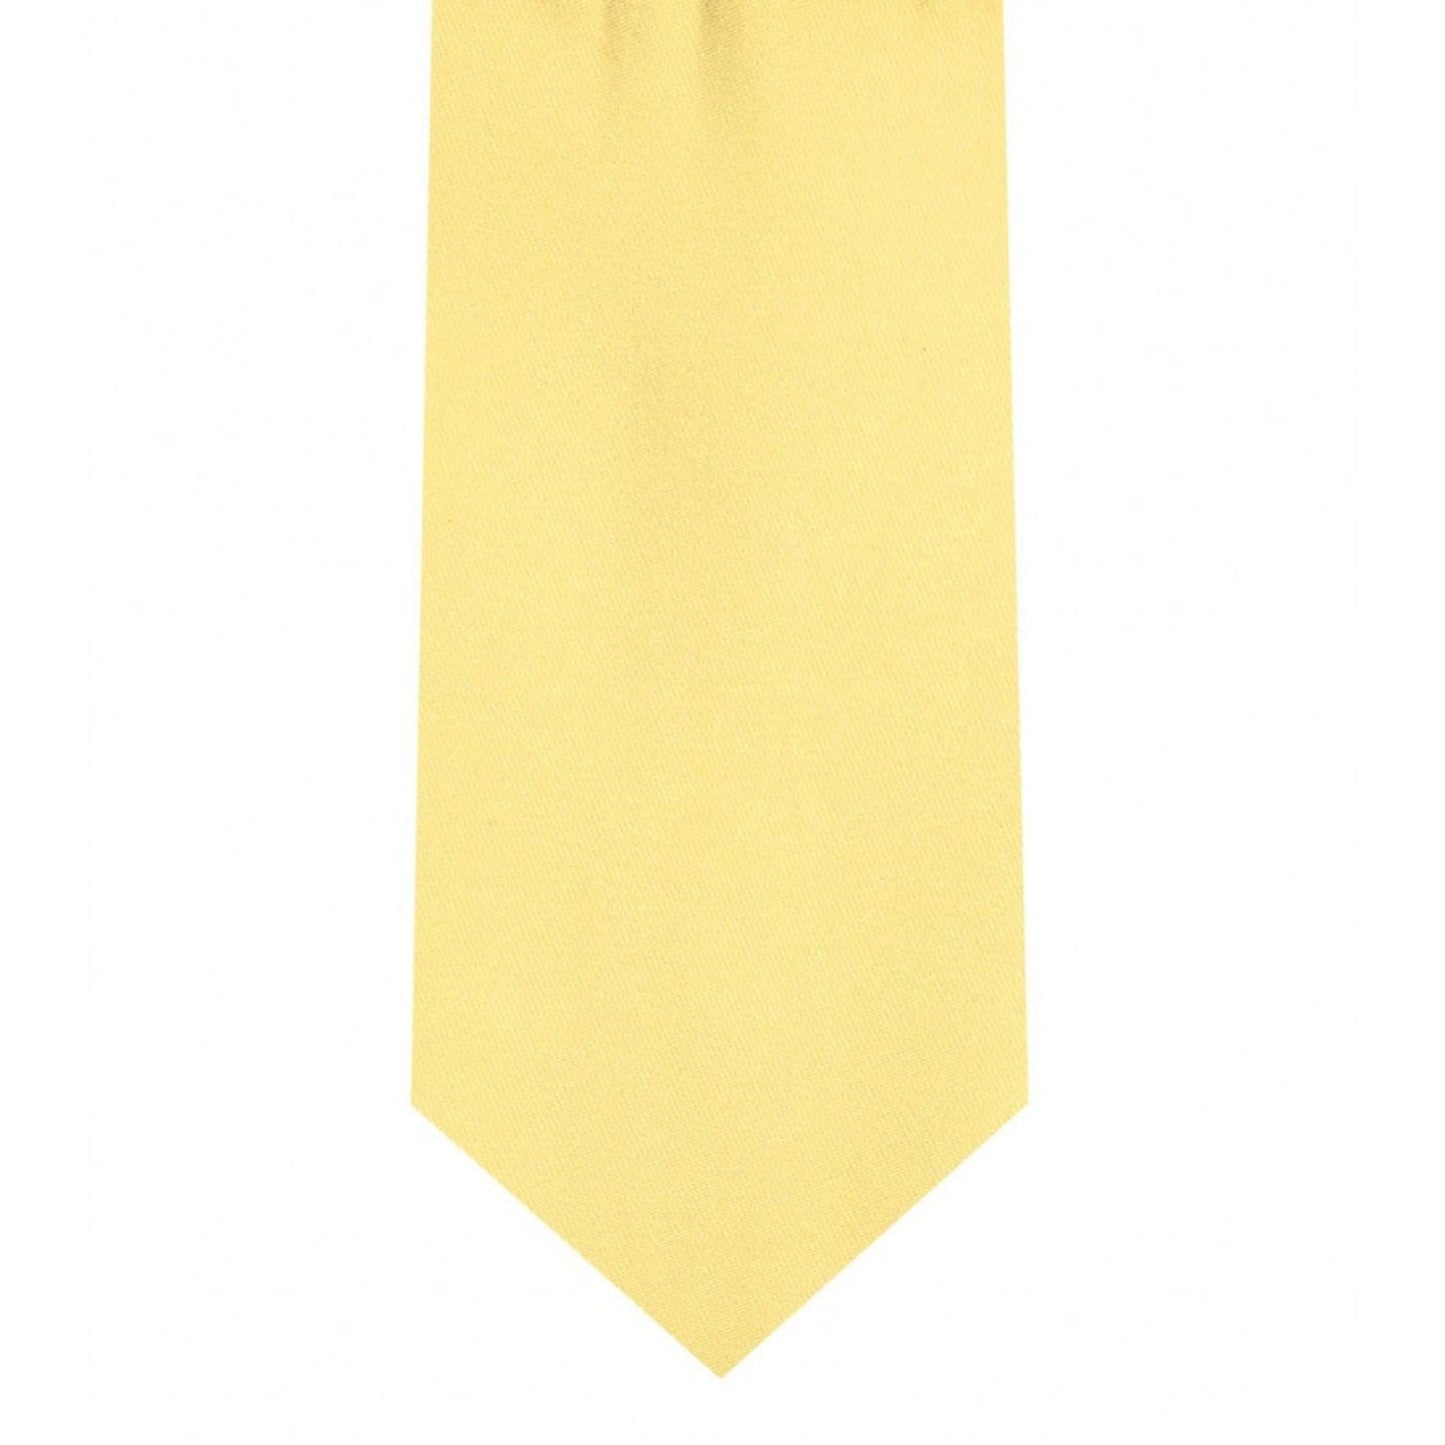 Classic Banana Yellow Tie Skinny width 2.75 inches With Matching Pocket Square | KCT Menswear